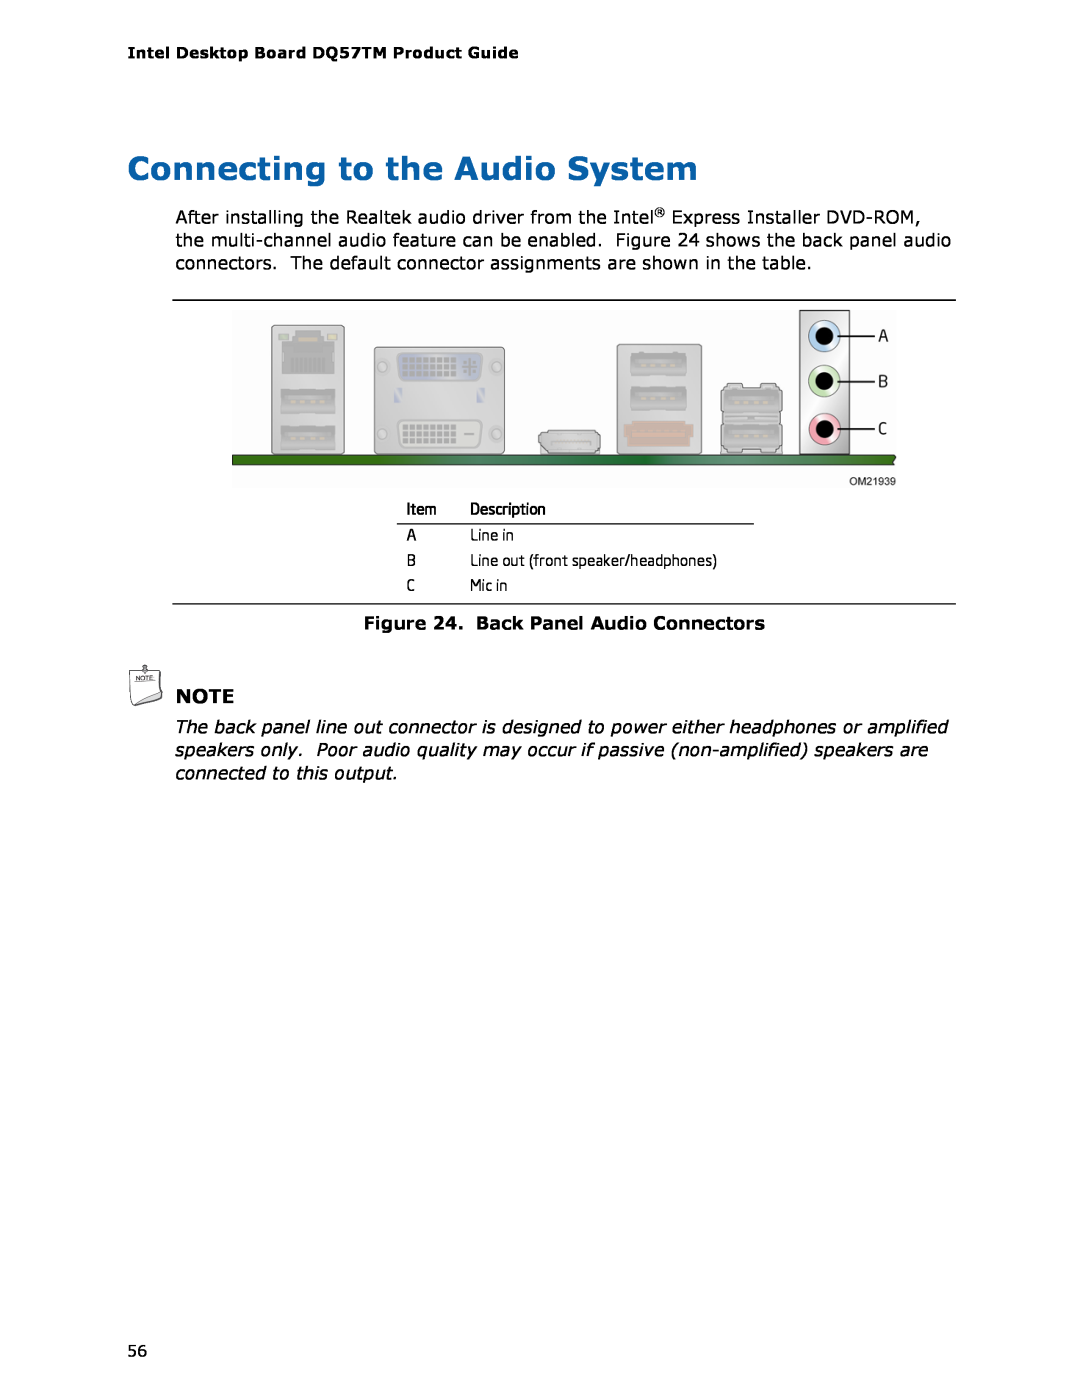 Intel DQ57TM manual Connecting to the Audio System, Back Panel Audio Connectors 